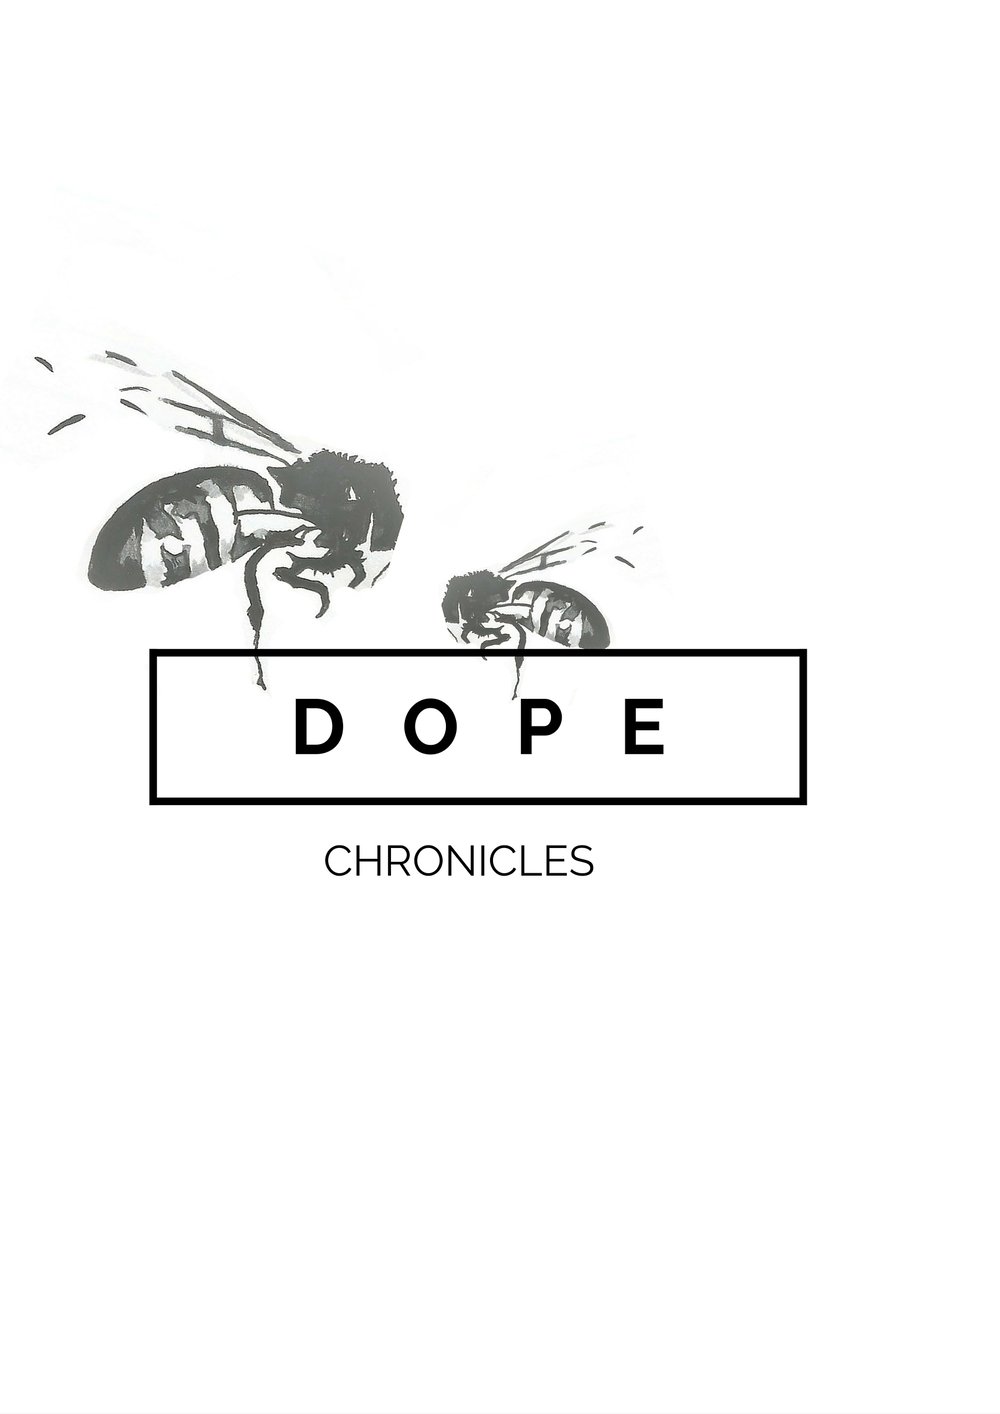 Image of DOPE CHRONICLES (print)